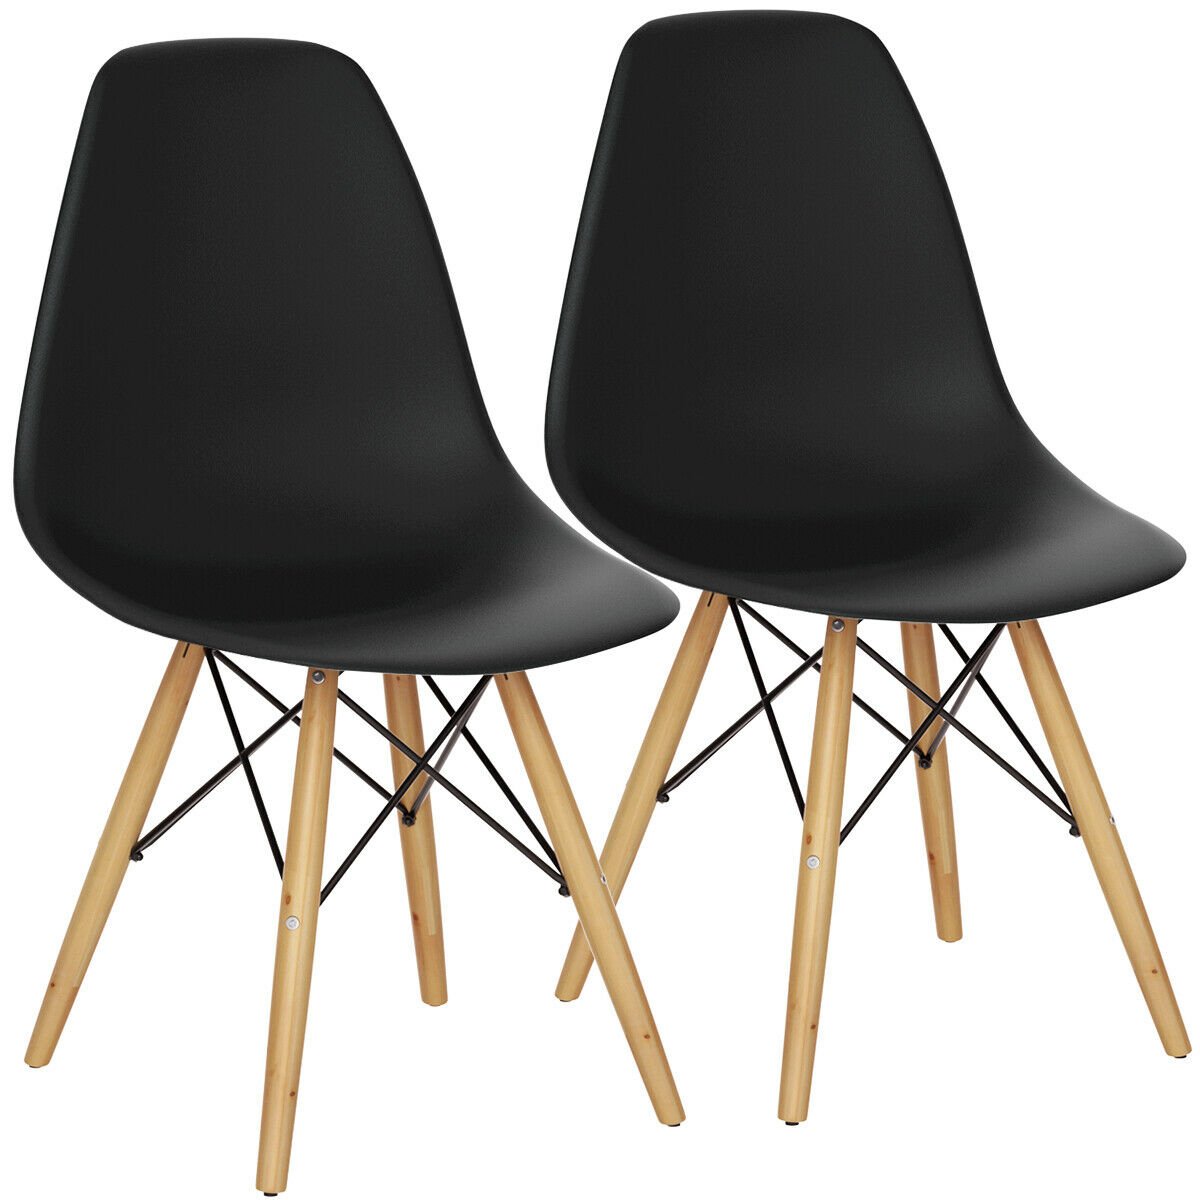 Set Of 2 Modern Dining Side Chair Armless Home Office W/ Wood Legs Black